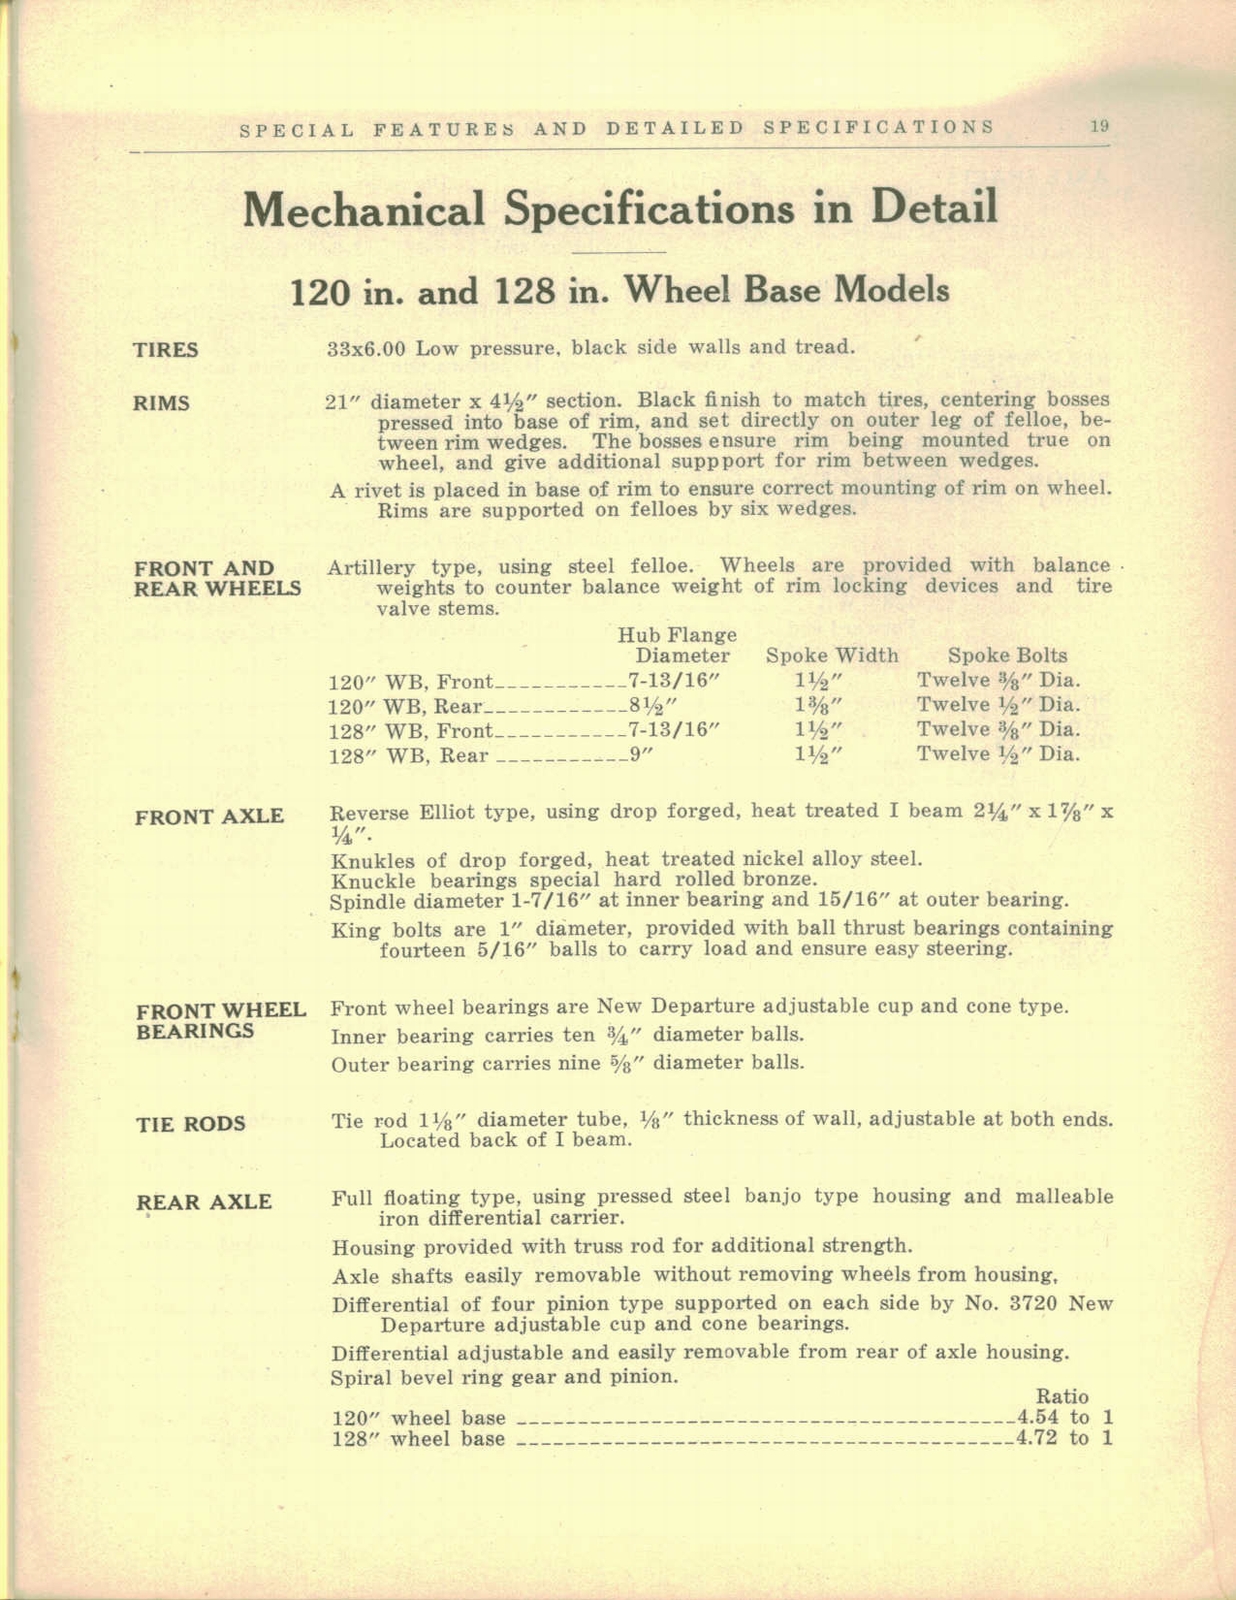 n_1927 Buick Special Features and Specs-19.jpg